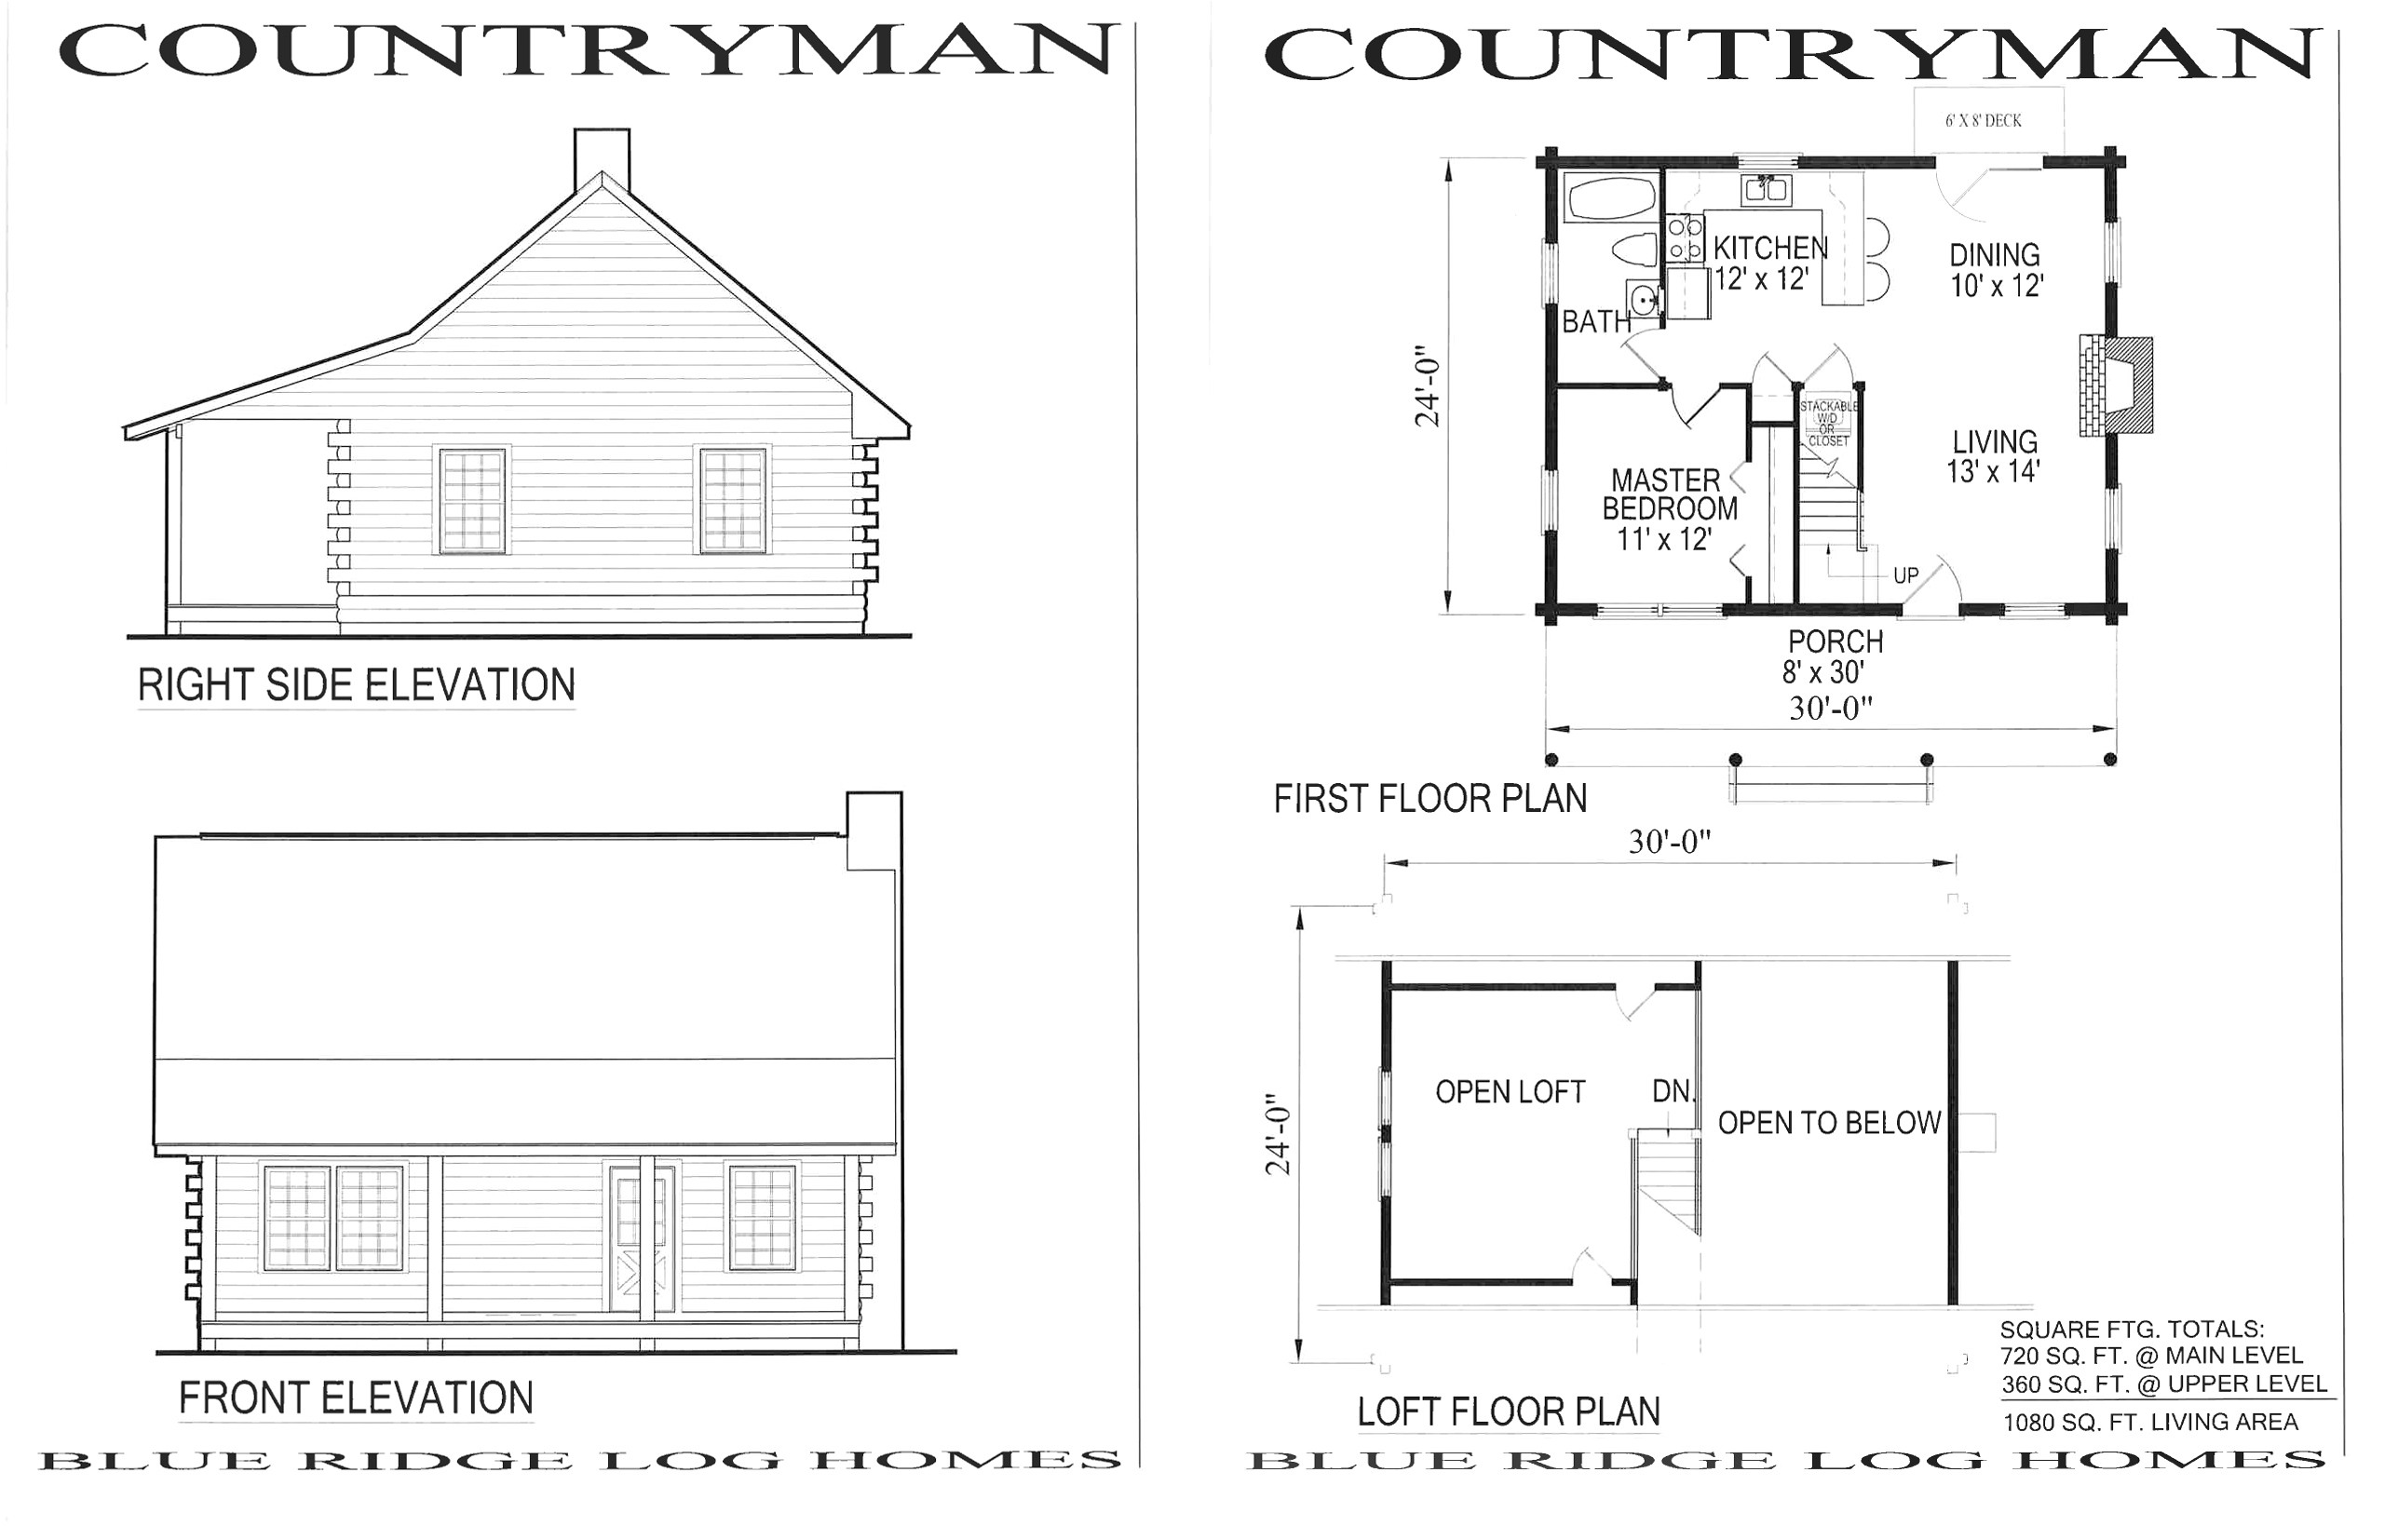 traditional log home floor plans